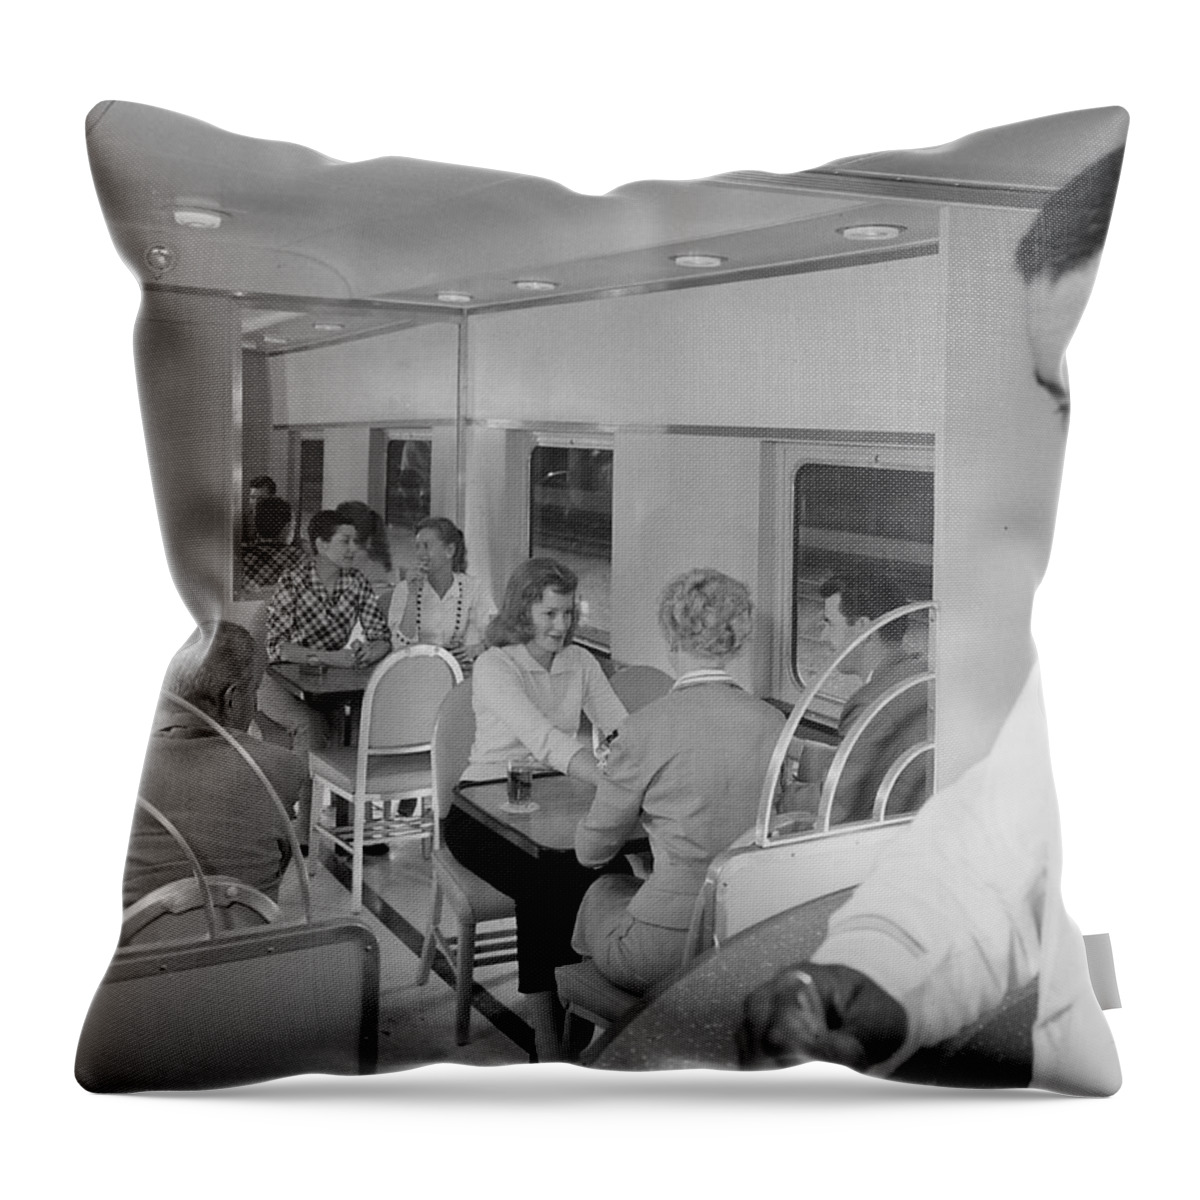 Passengers Throw Pillow featuring the photograph Passengers Mingle on Train - 1958 by Chicago and North Western Historical Society